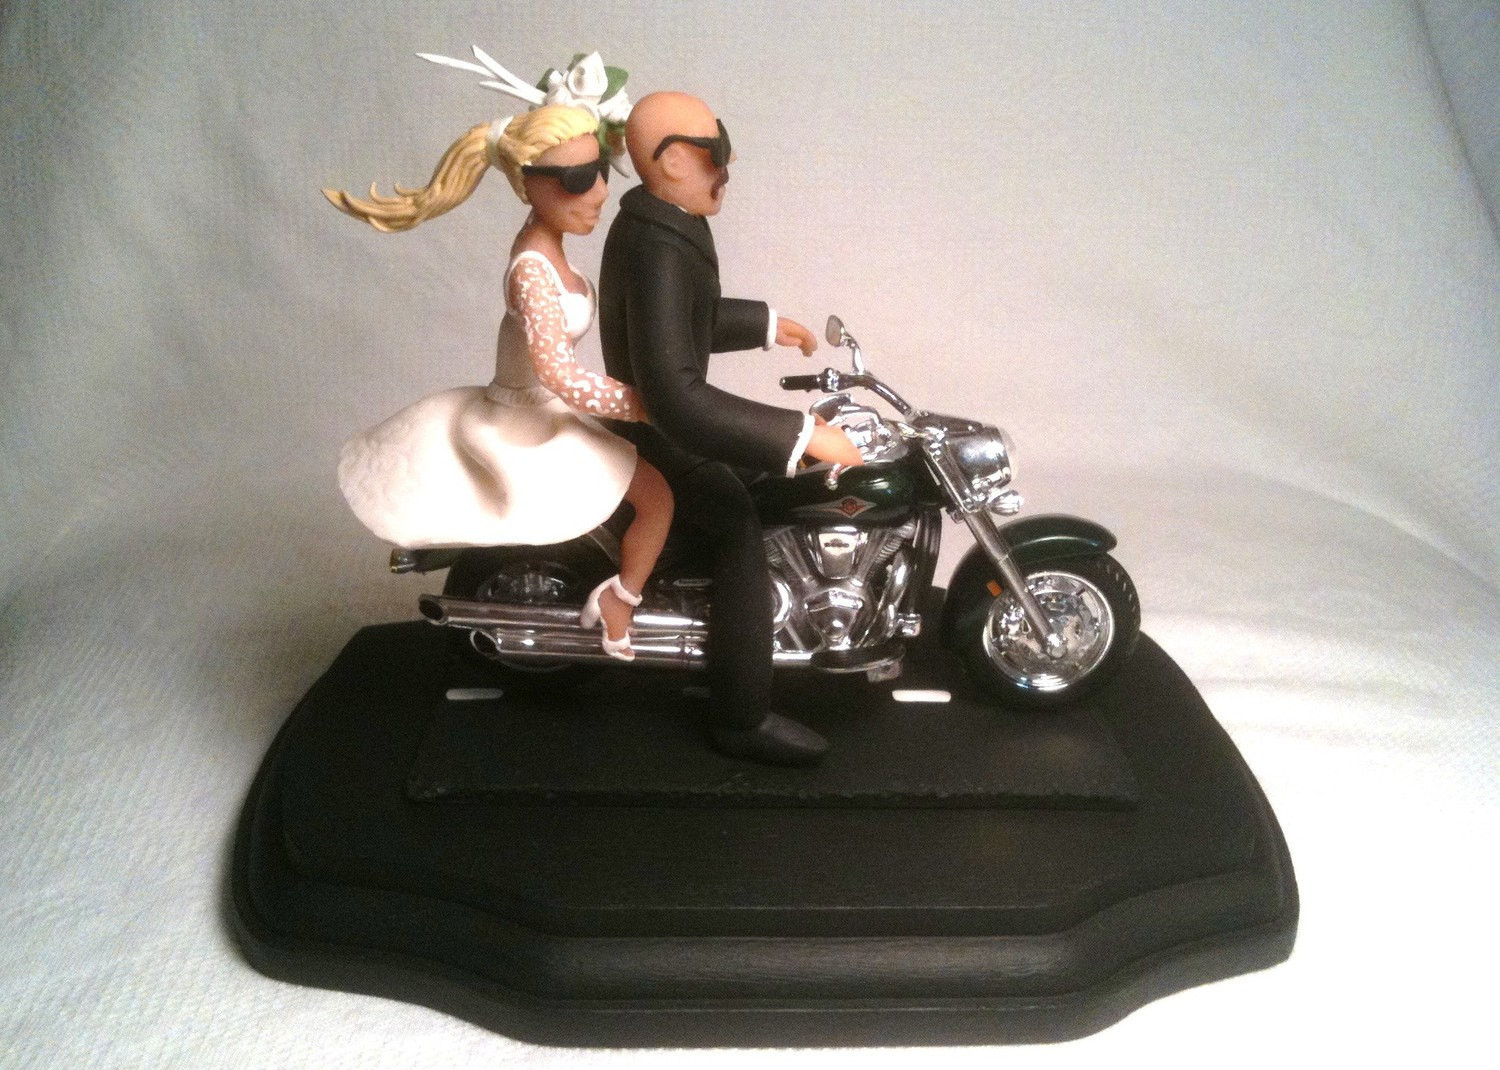 Motorcycle Cake Toppers For Wedding Cakes
 wedding cake toppers Western Wedding Cake Toppers